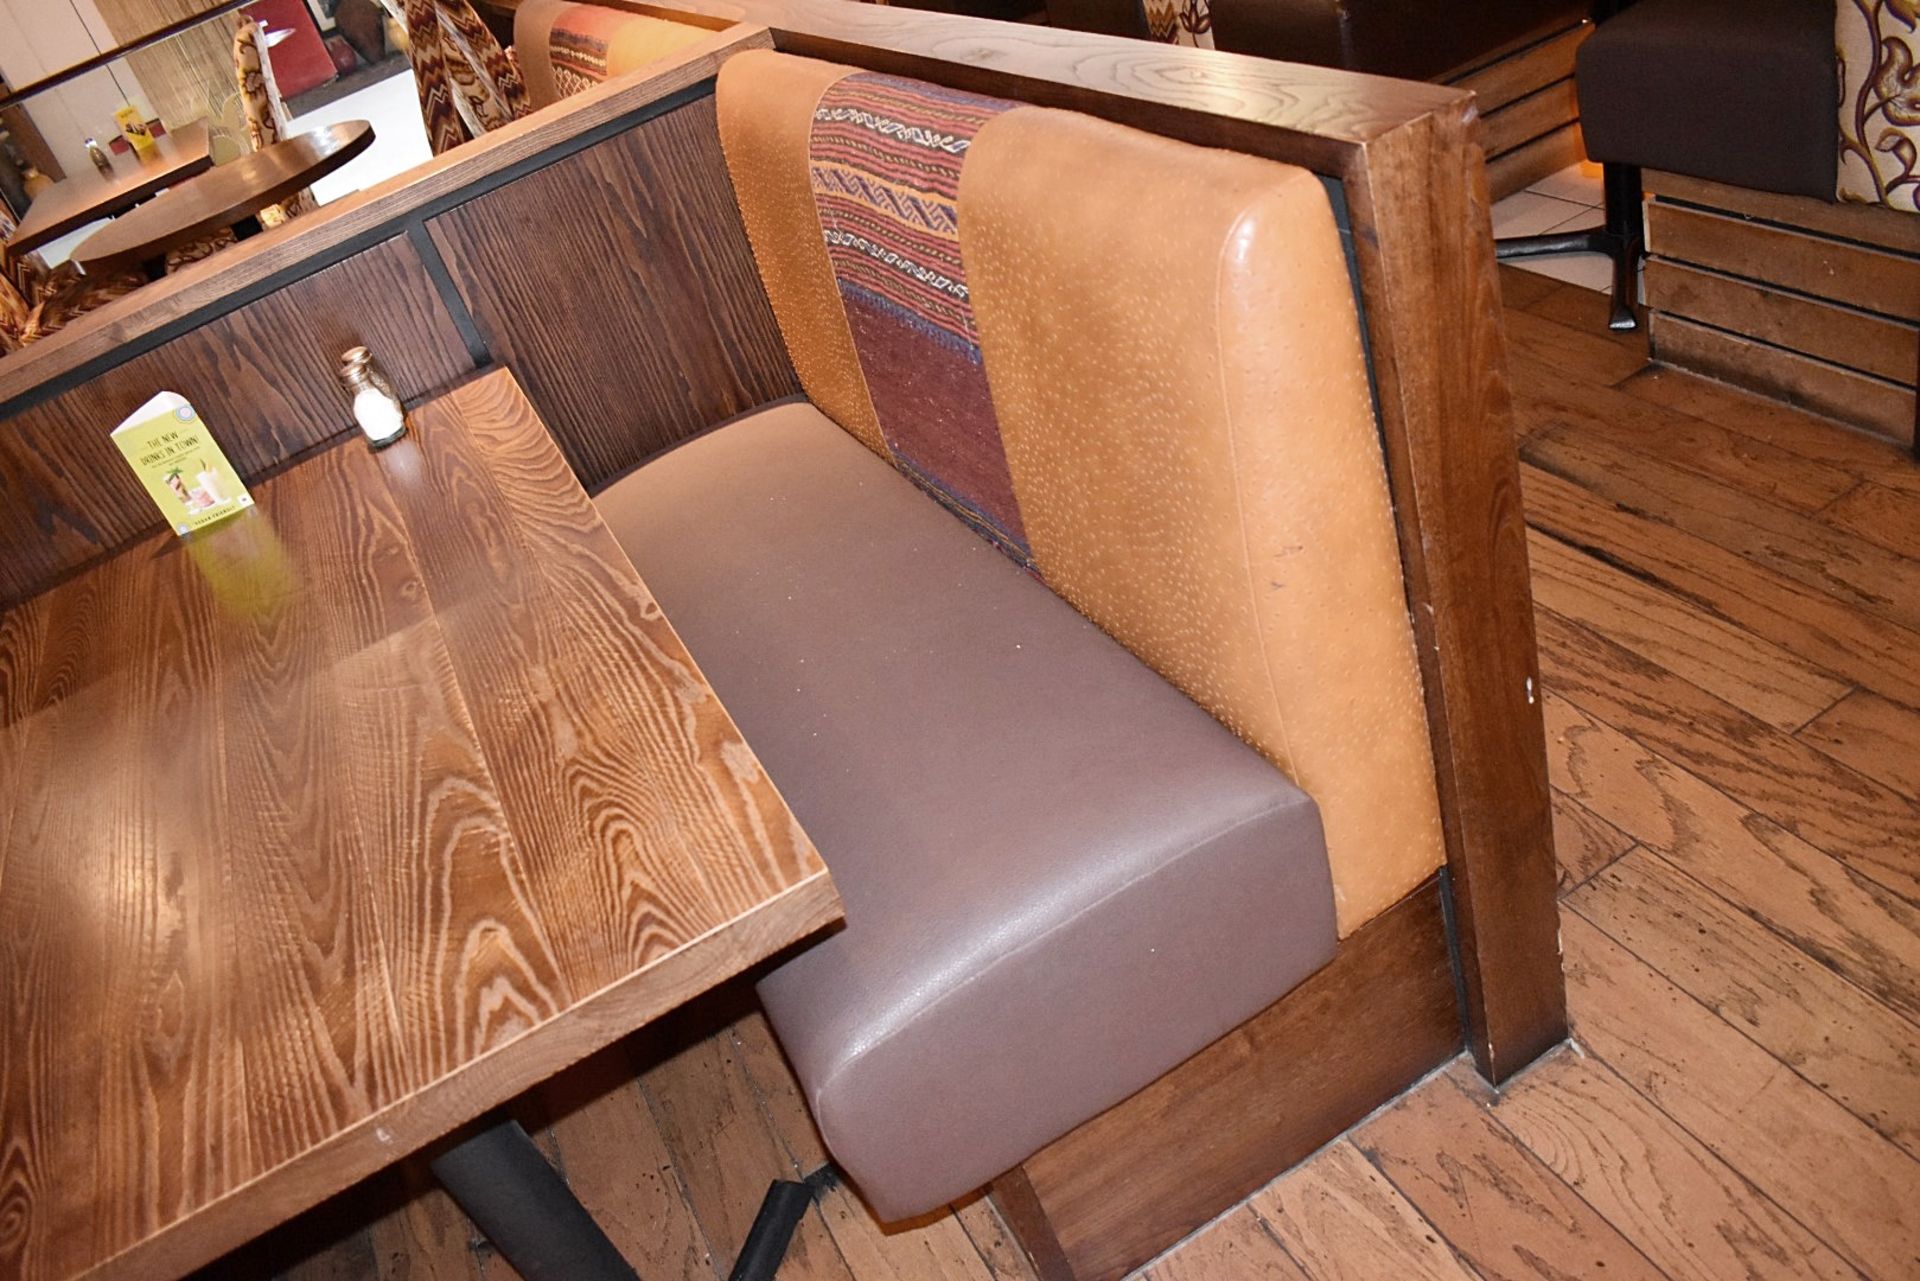 15-Pieces Of Restaurant Booth Seating Of Varying Length - Image 13 of 22